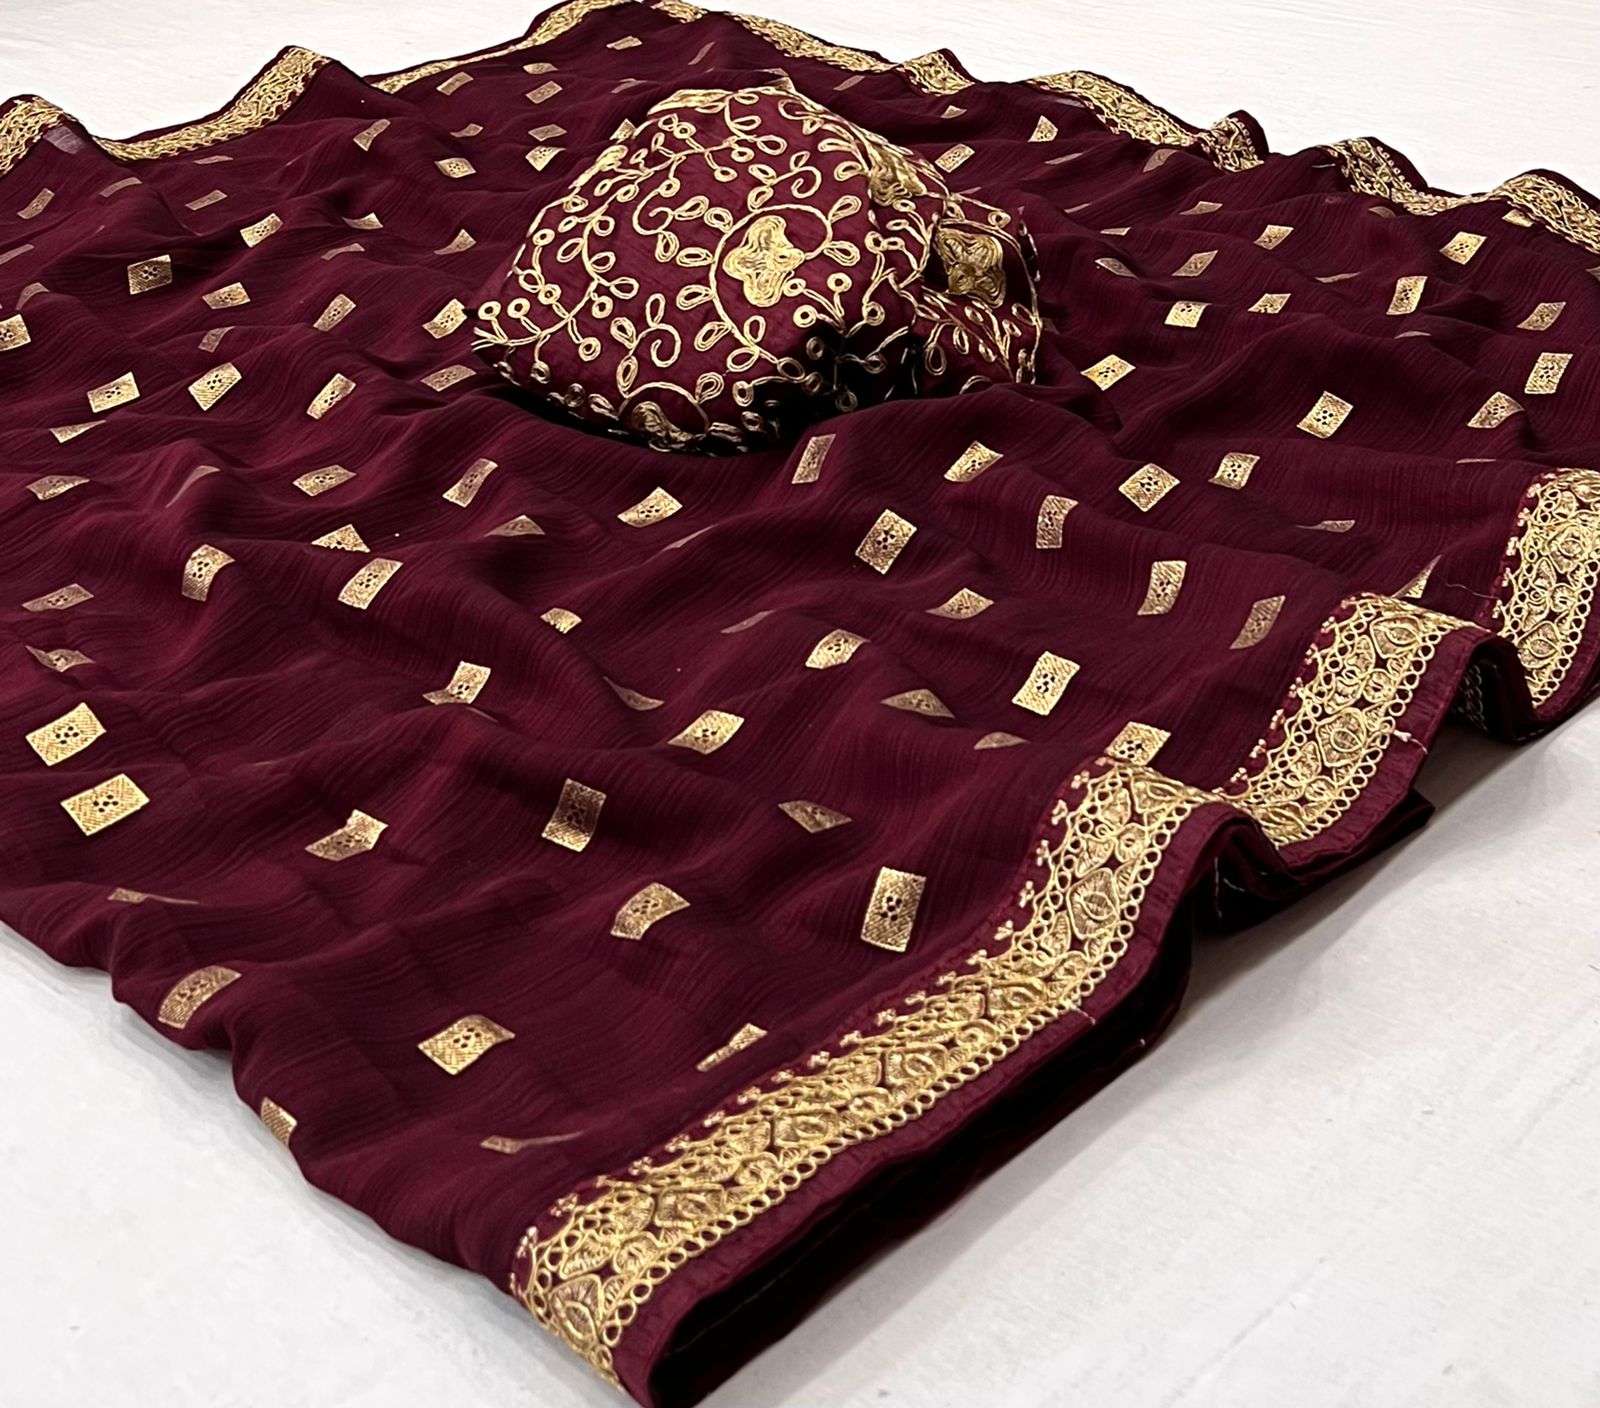 Brahmansh Georgette with foil Print & Embroidery work Border...